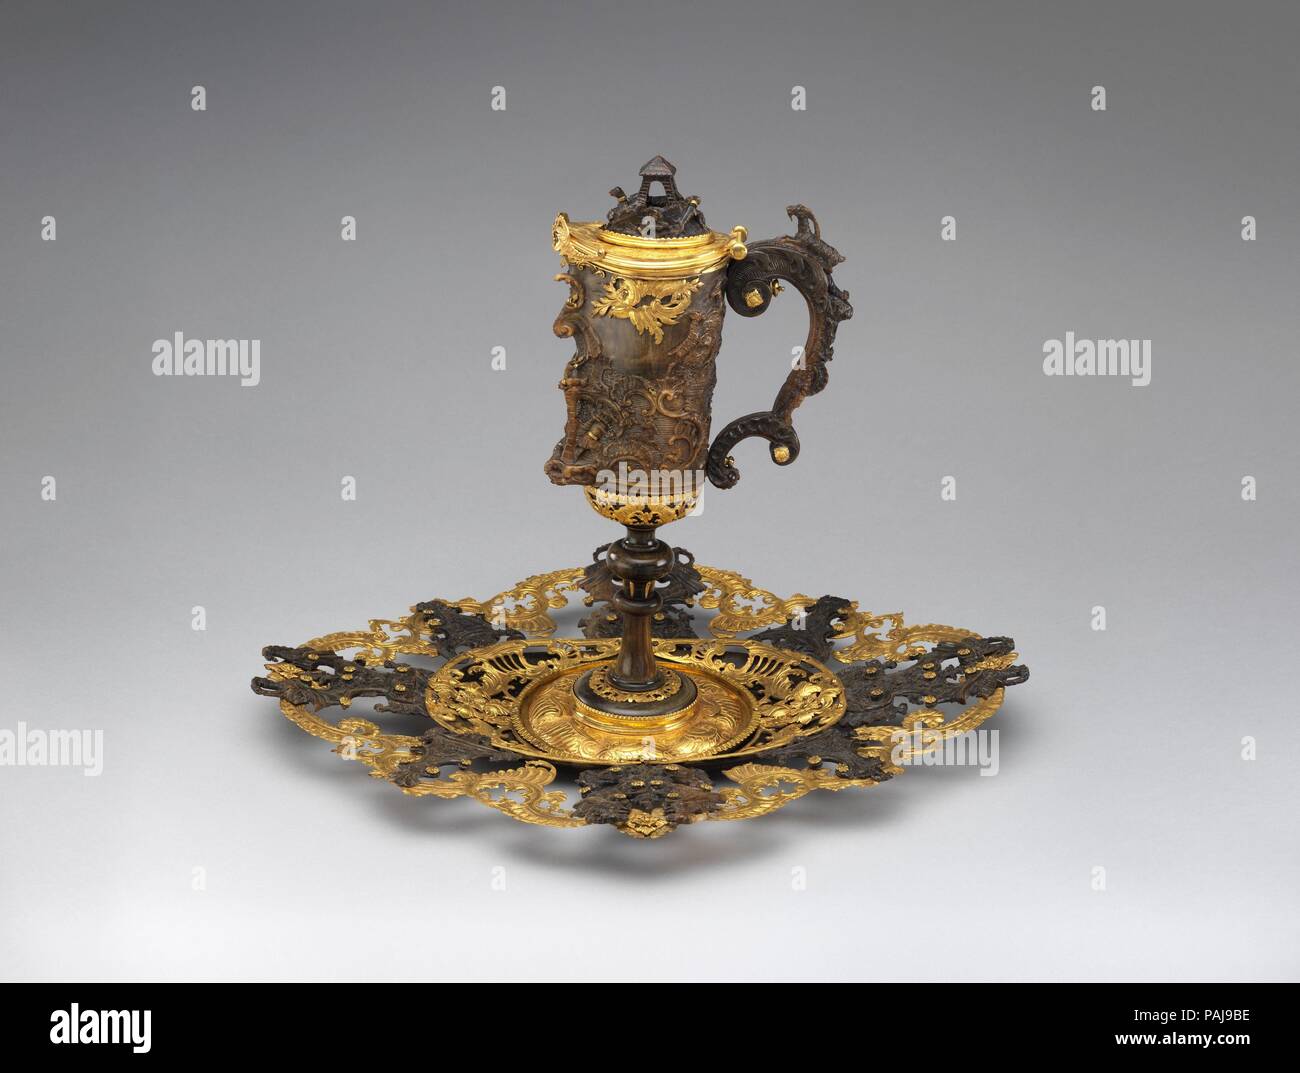 https://c8.alamy.com/comp/PAJ9BE/ewer-and-stand-prsentoir-culture-austrian-salzburg-dimensions-overall-ewer-12-1316-in-325-cm-overall-basin-17-516-14-1516-in-44-38-cm-maker-martin-gizl-austrian-1707-1786-date-1758-worth-its-weight-in-gold-alpine-ibex-horn-was-prized-for-its-purported-ability-to-prevent-poisoning-as-well-as-its-aphrodisiac-properties-the-hunting-of-the-alpine-ibex-an-endangered-wild-goat-species-was-restricted-to-the-prince-archbishops-of-salzburg-artworks-made-of-alpine-ibex-horn-were-sent-to-foreign-courts-as-diplomatic-gifts-the-manipulation-of-this-delicate-mater-PAJ9BE.jpg